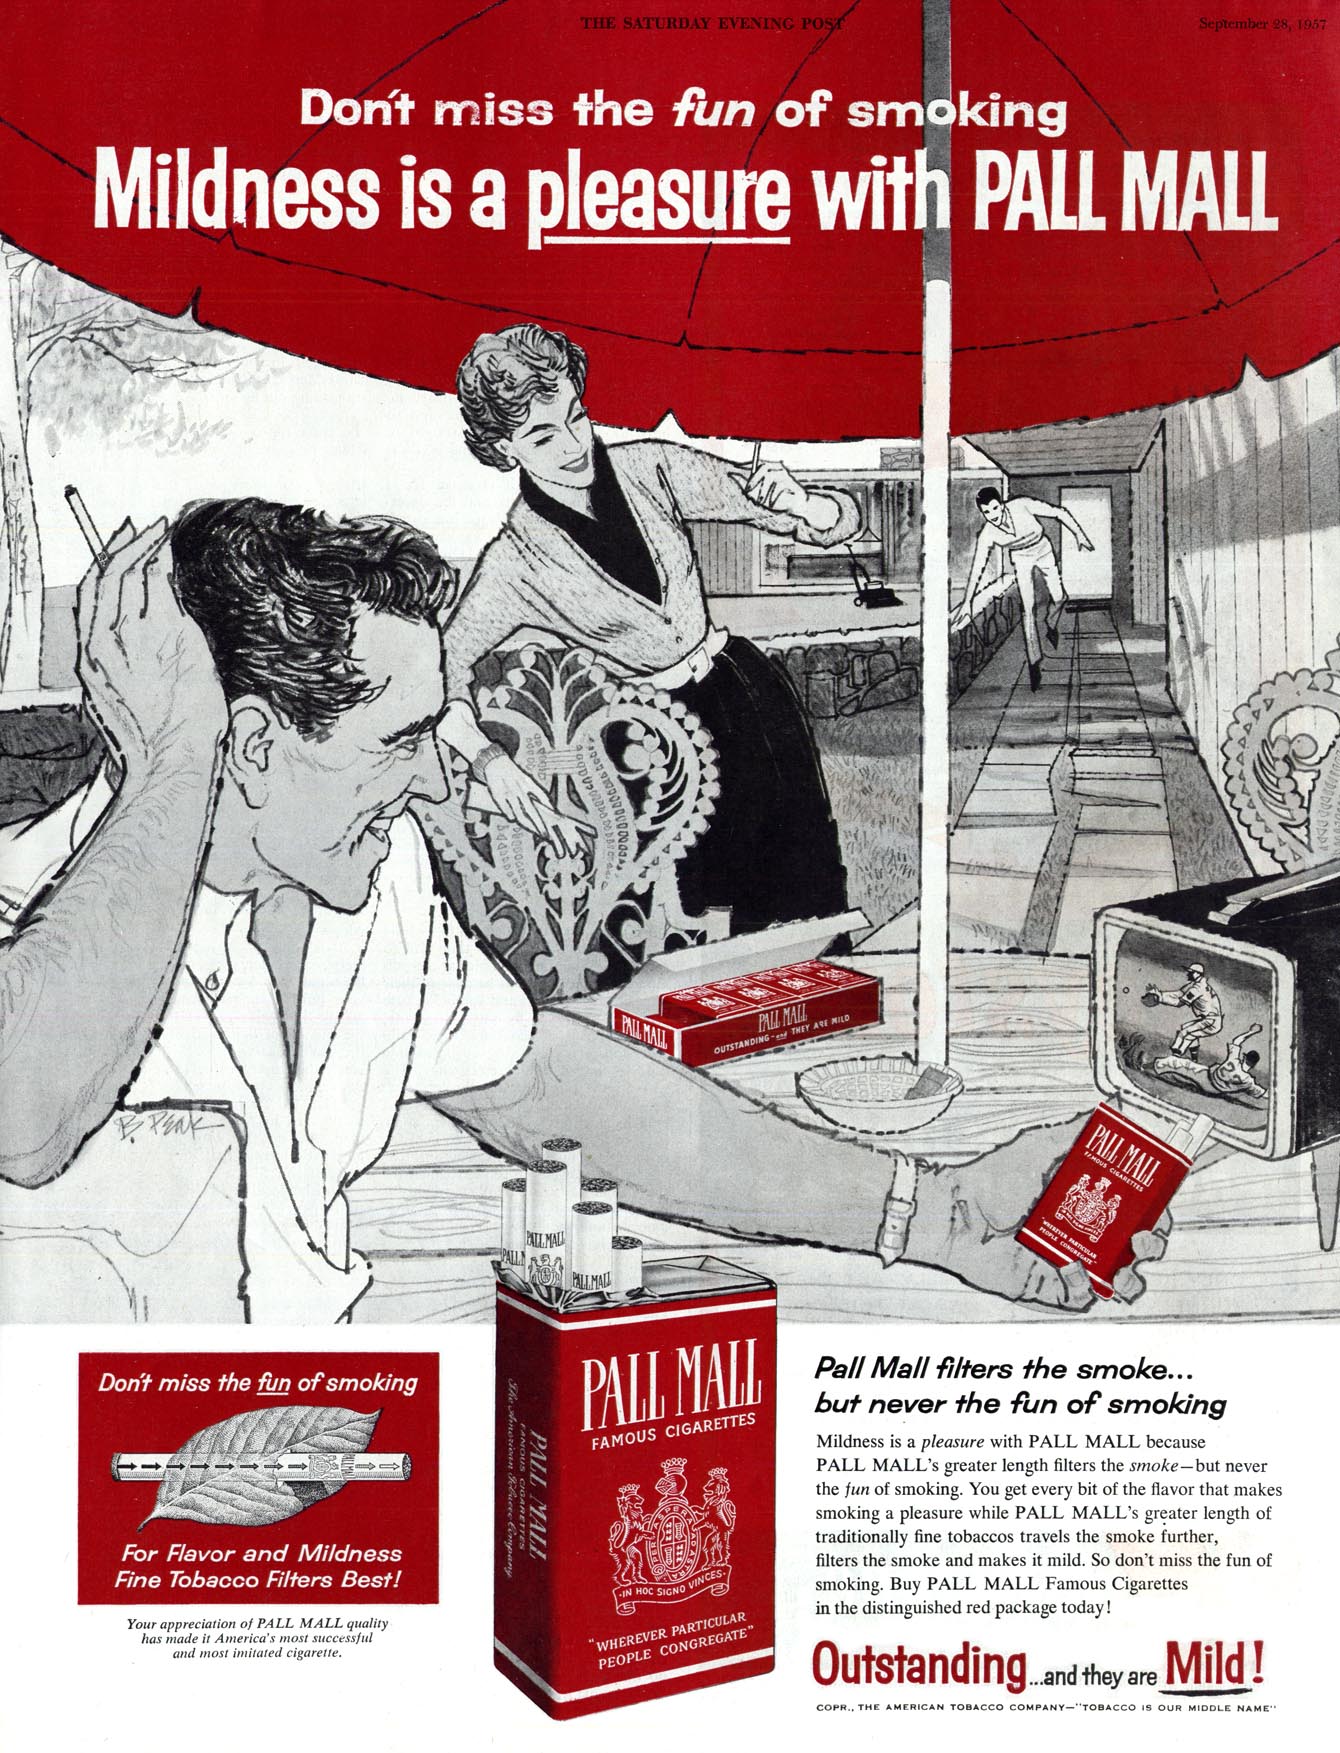 Pall Mall - published in The Saturday Evening Post - September 28, 1957